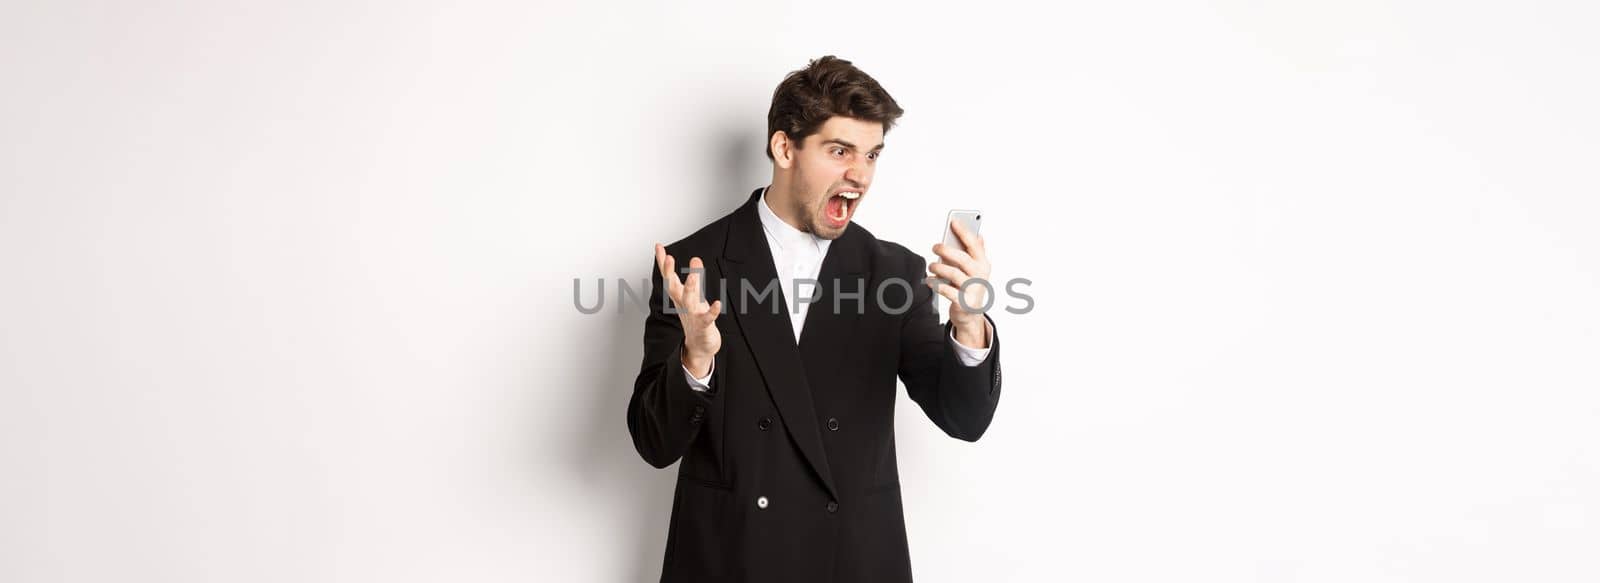 Portrait of angry businessman in black suit yelling at mobile phone, having an argument on video call, standing mad over white background.